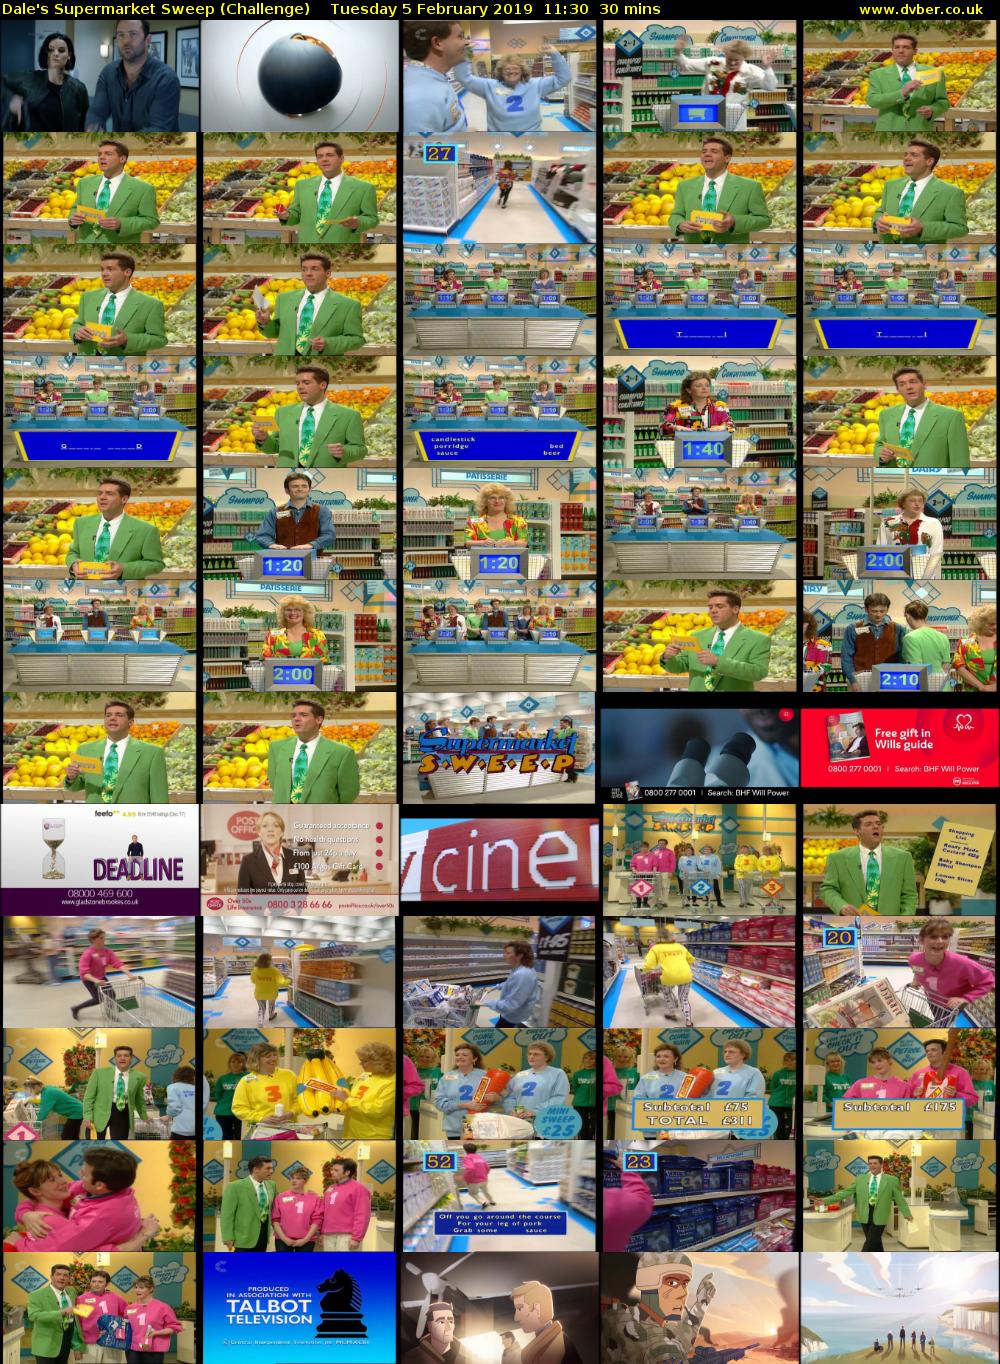 Dale's Supermarket Sweep (Challenge) Tuesday 5 February 2019 11:30 - 12:00